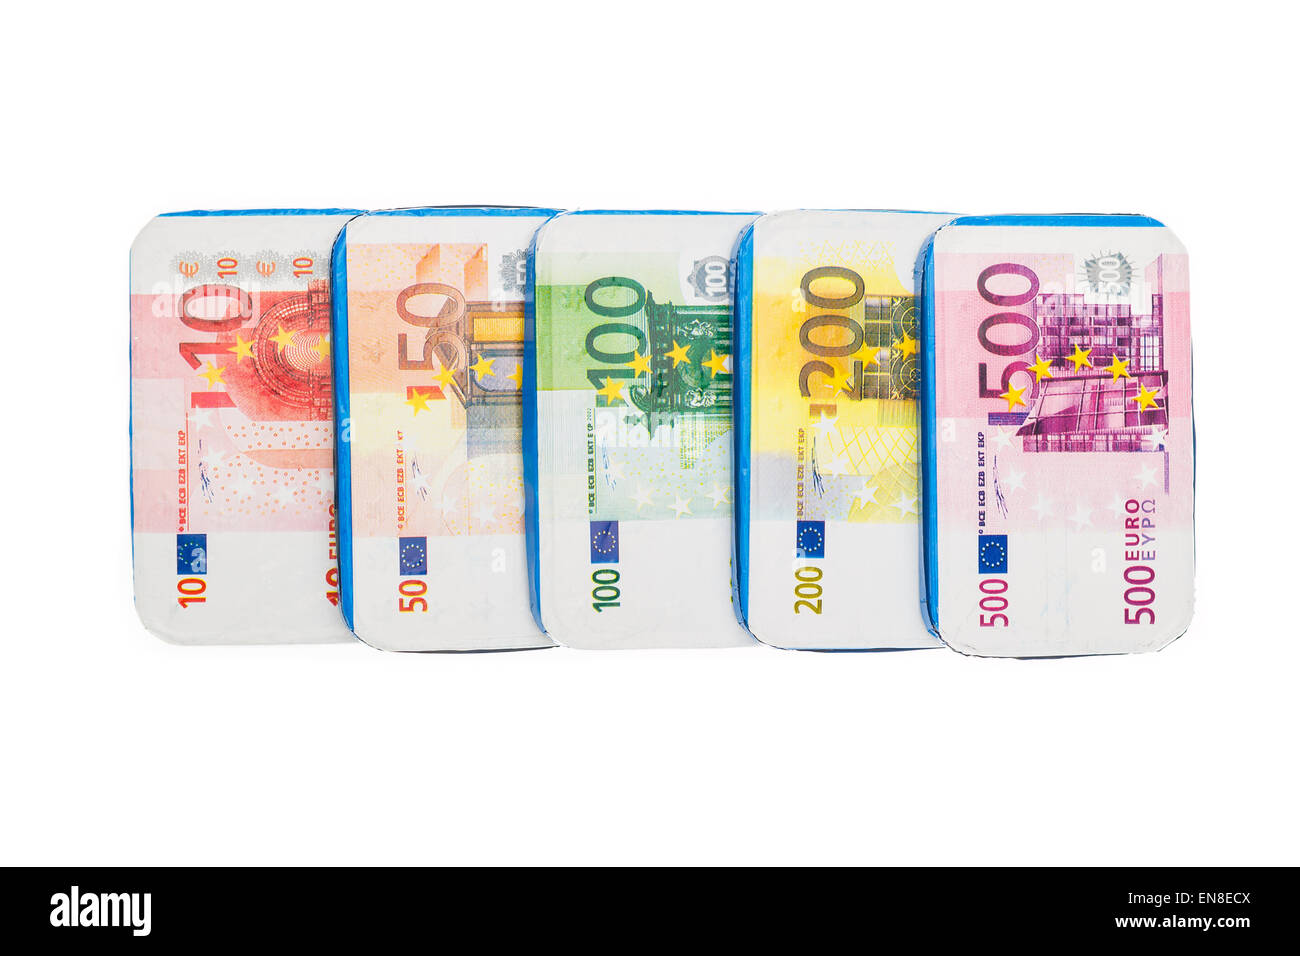 Fake euro banknotes of chocolate for Sinterklaas. Event in Holland, Netherlands and Belgium on 5 december. Stock Photo